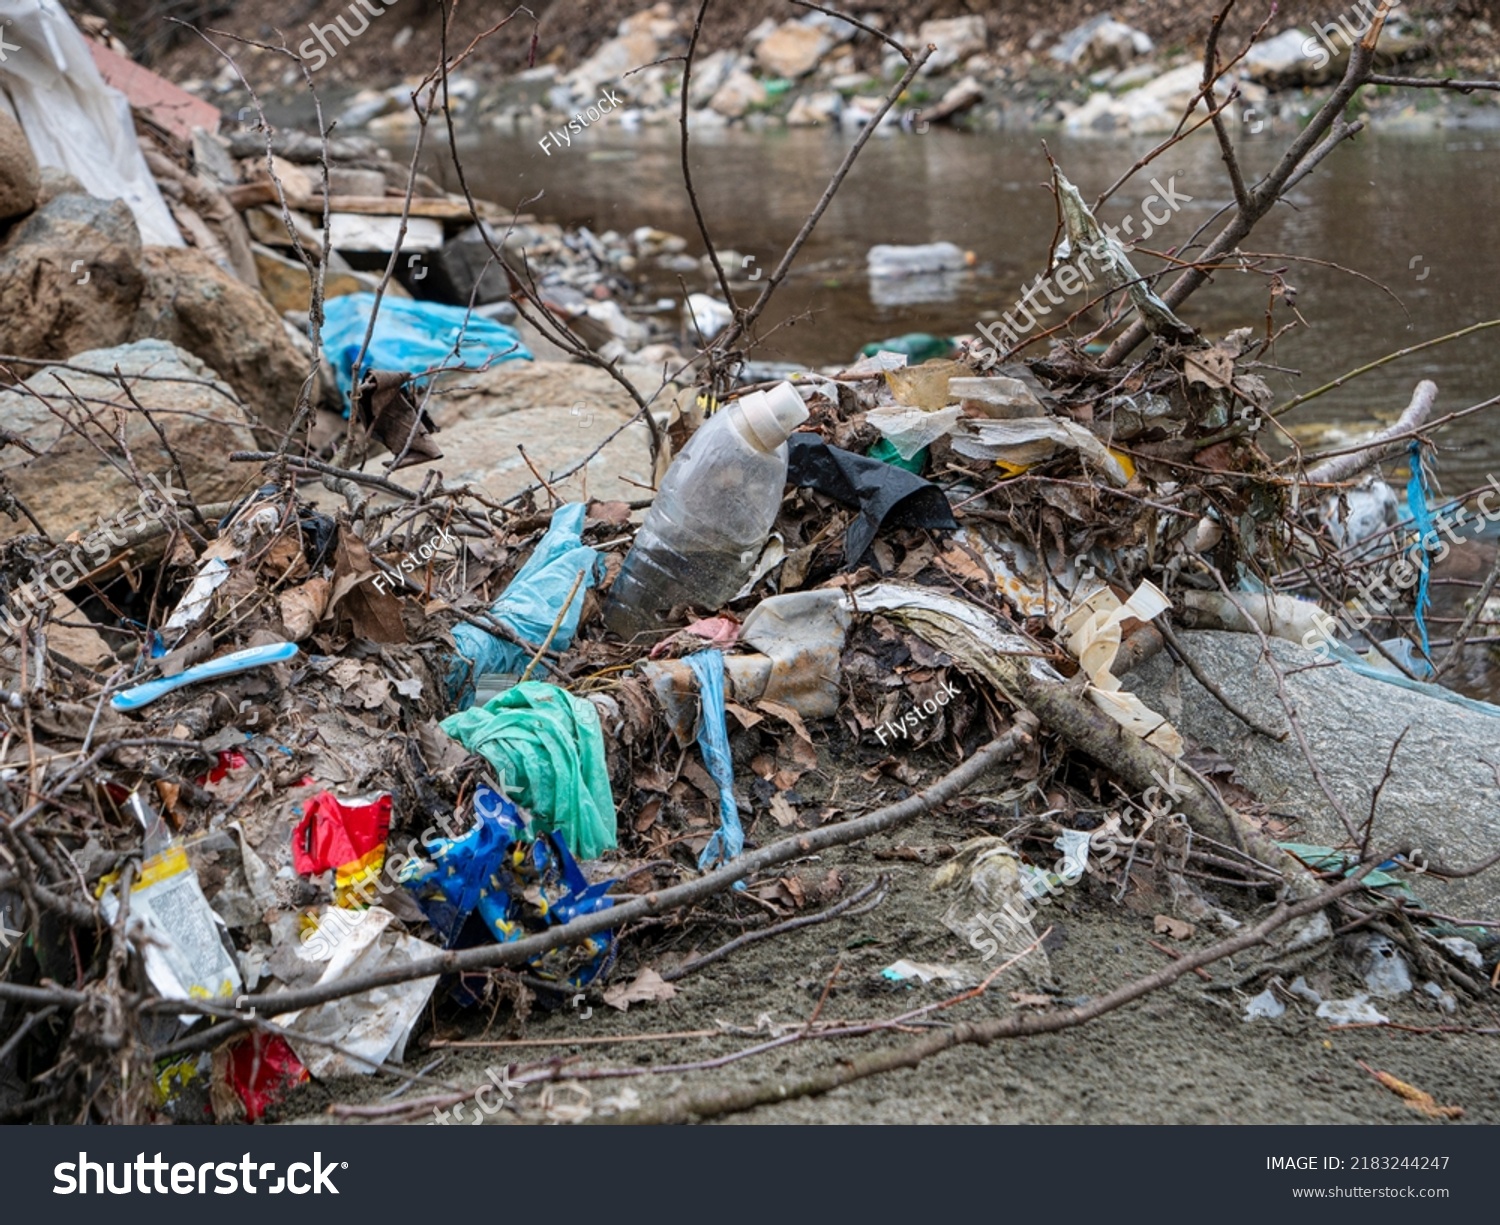 TIRANA, ALBANIA, MARCH 2022: Flooded plastic rubbish at the river bank as waste management issue. River debris and plastic garbage mix on a sandy river shore. The need to raise environmental awareness #2183244247